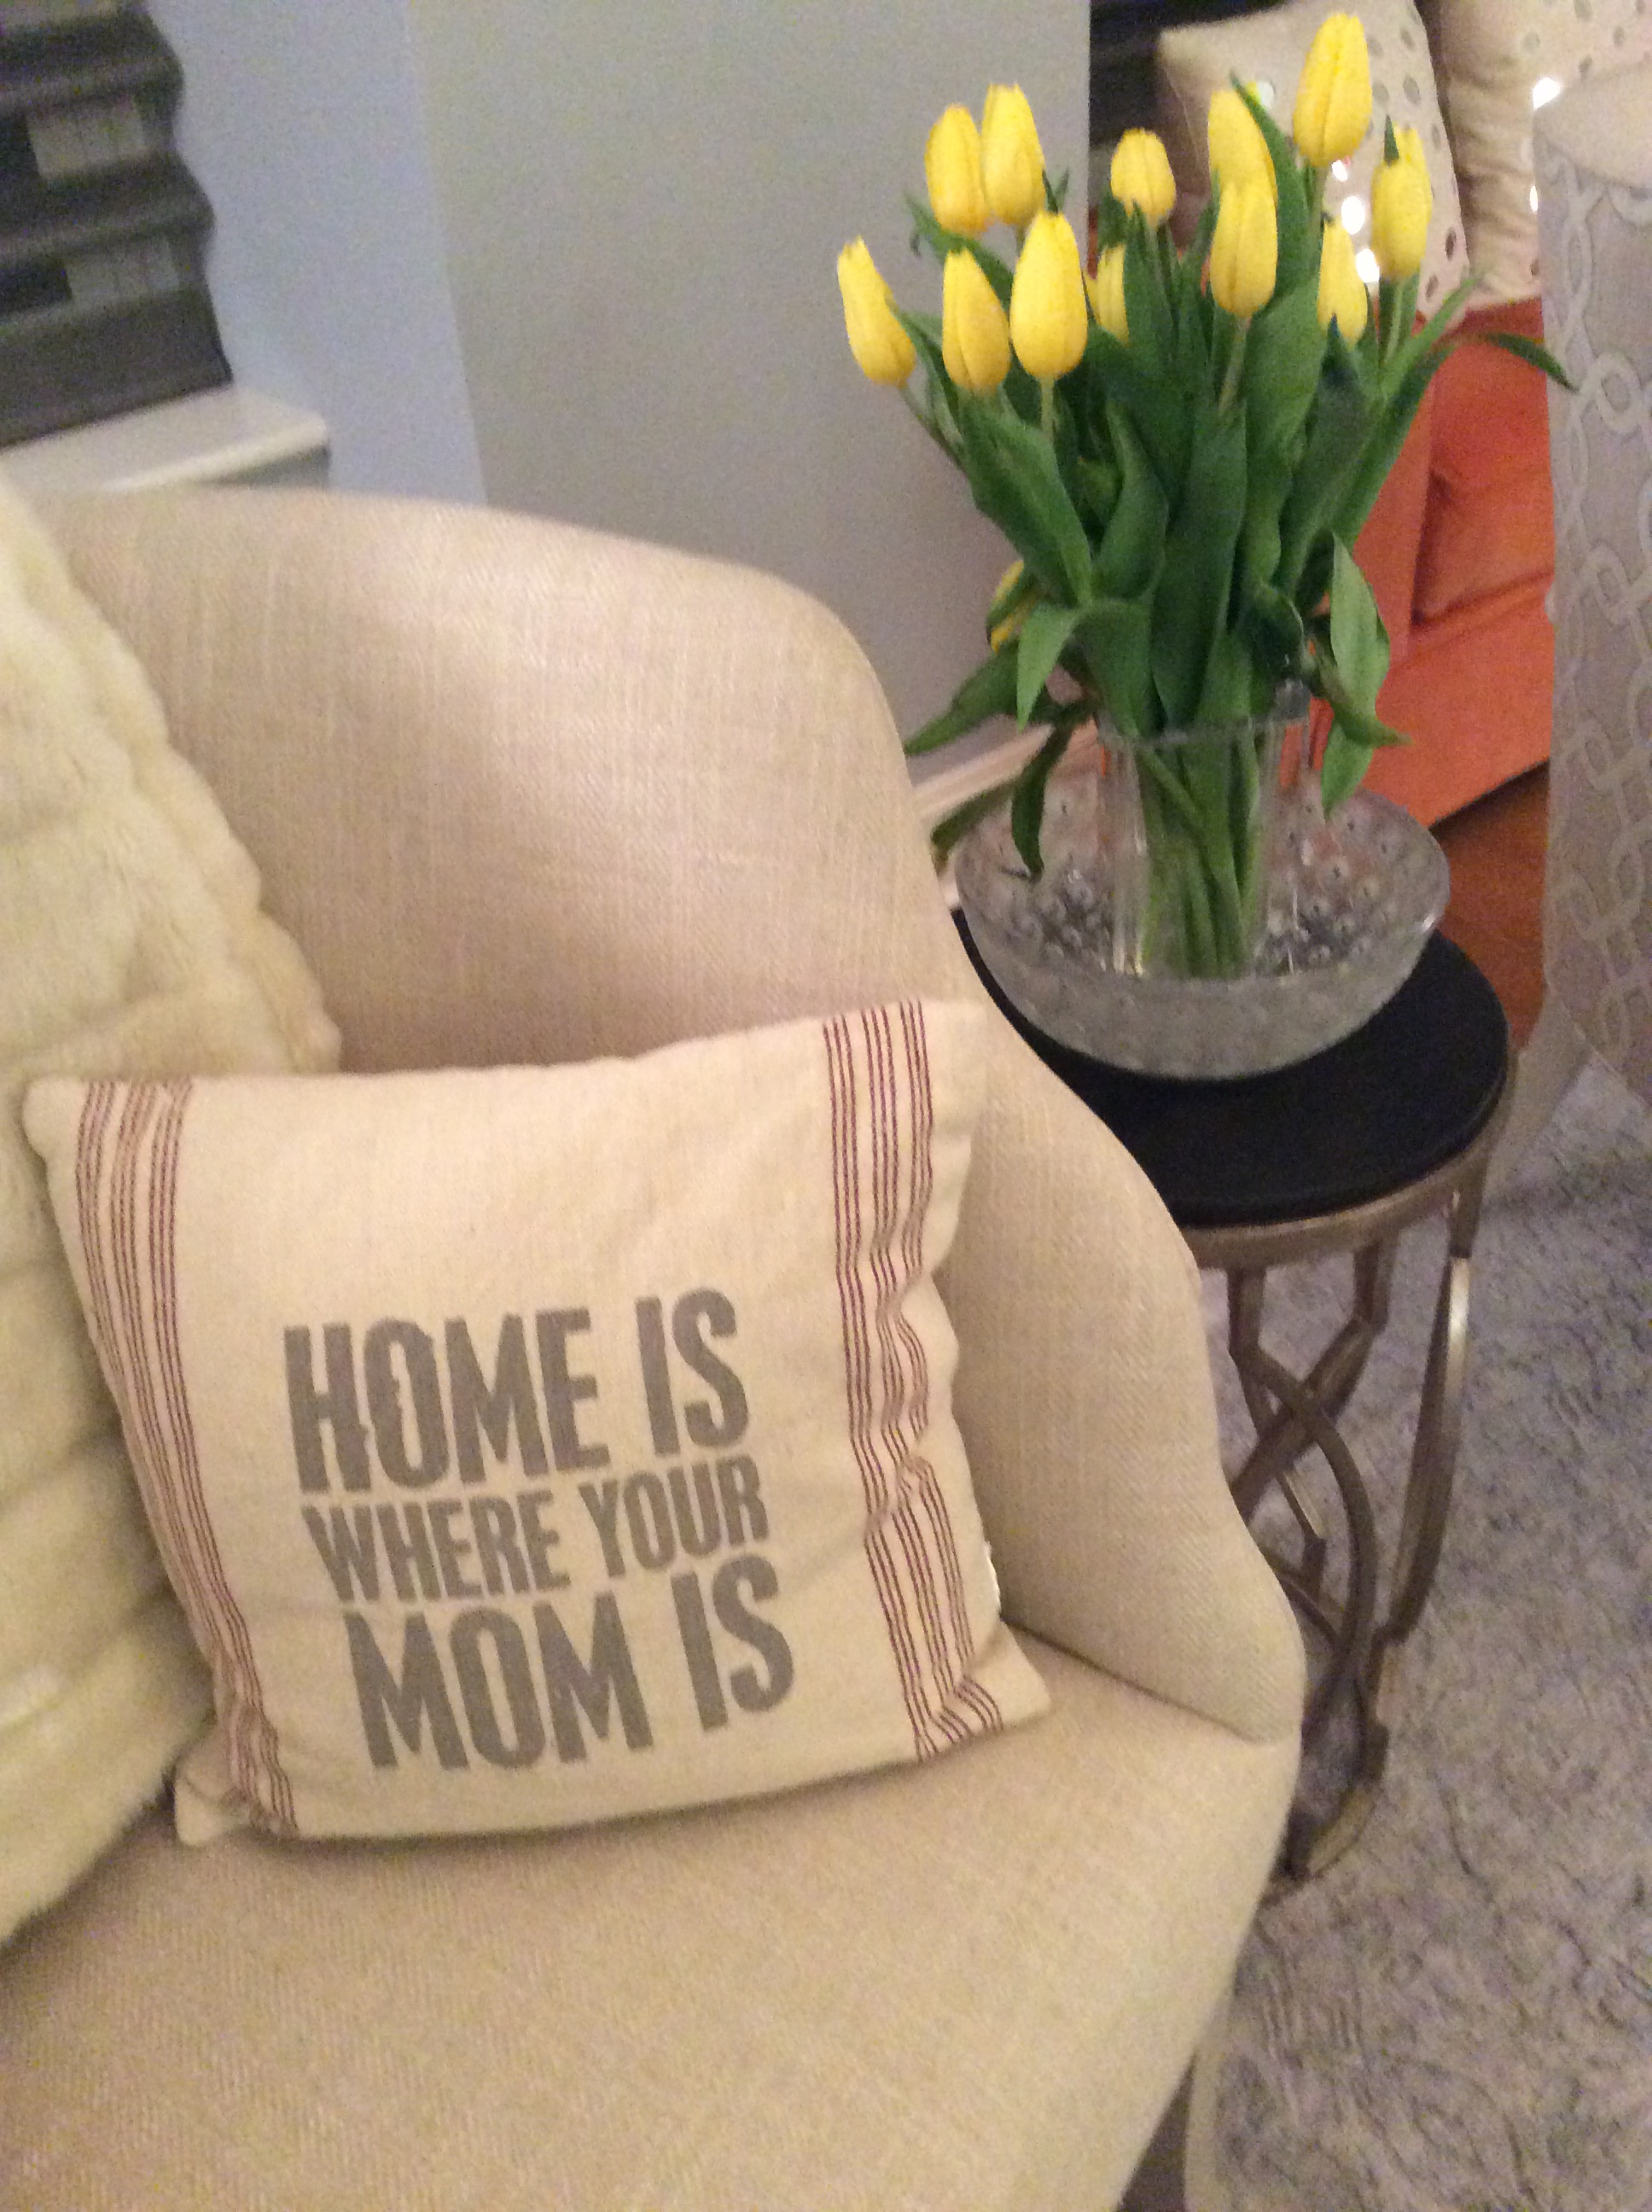 Home is where the mom is